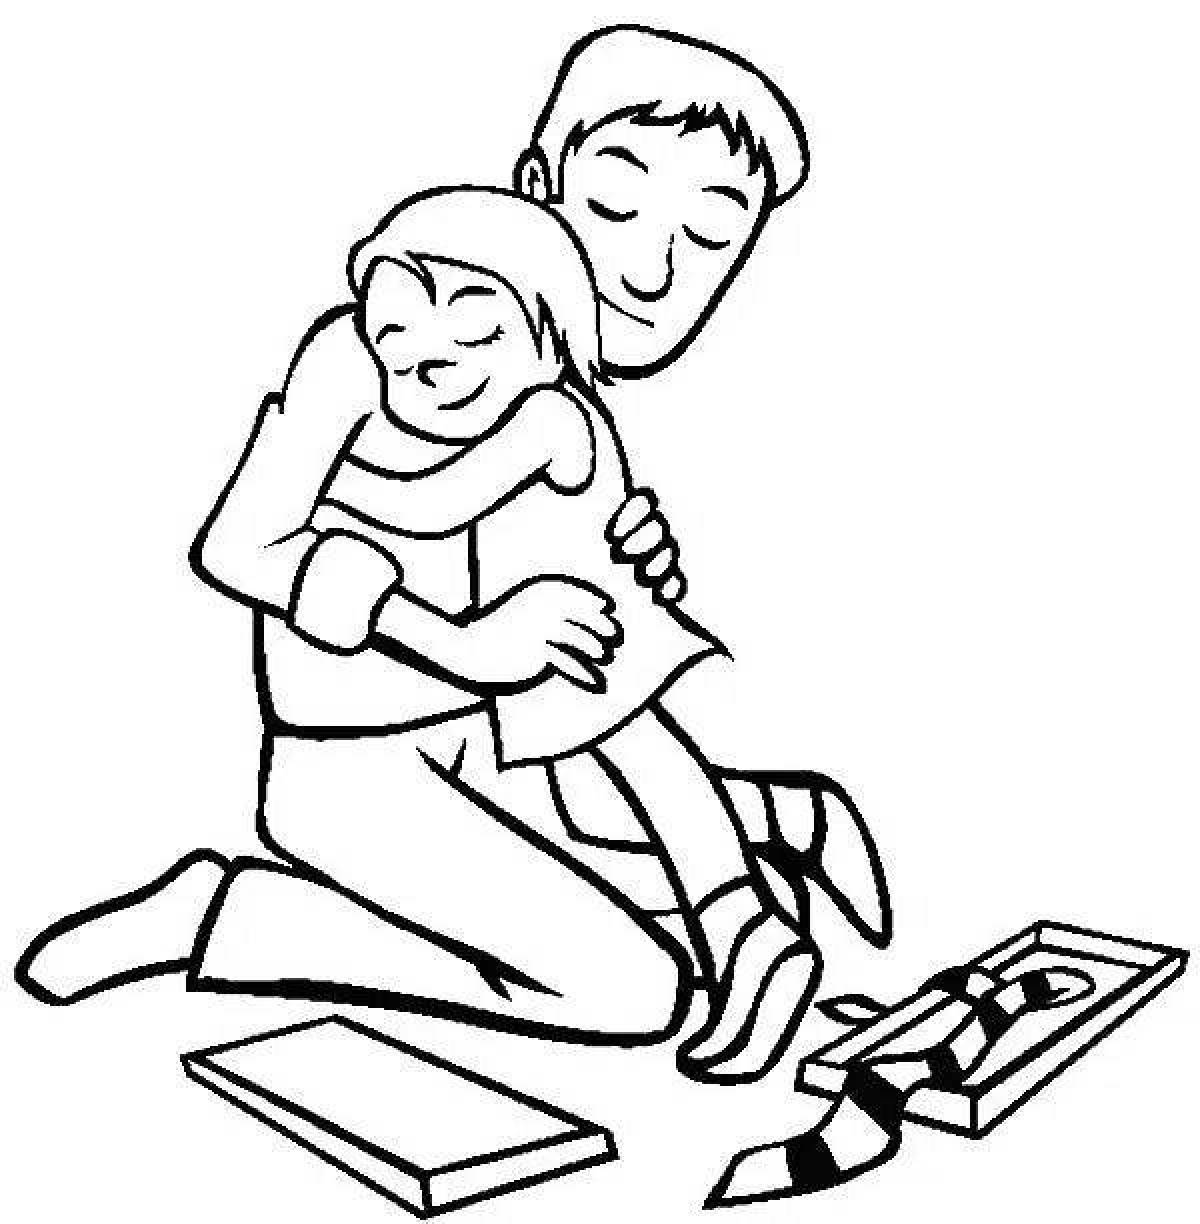 Coloring page adorable dad and daughter